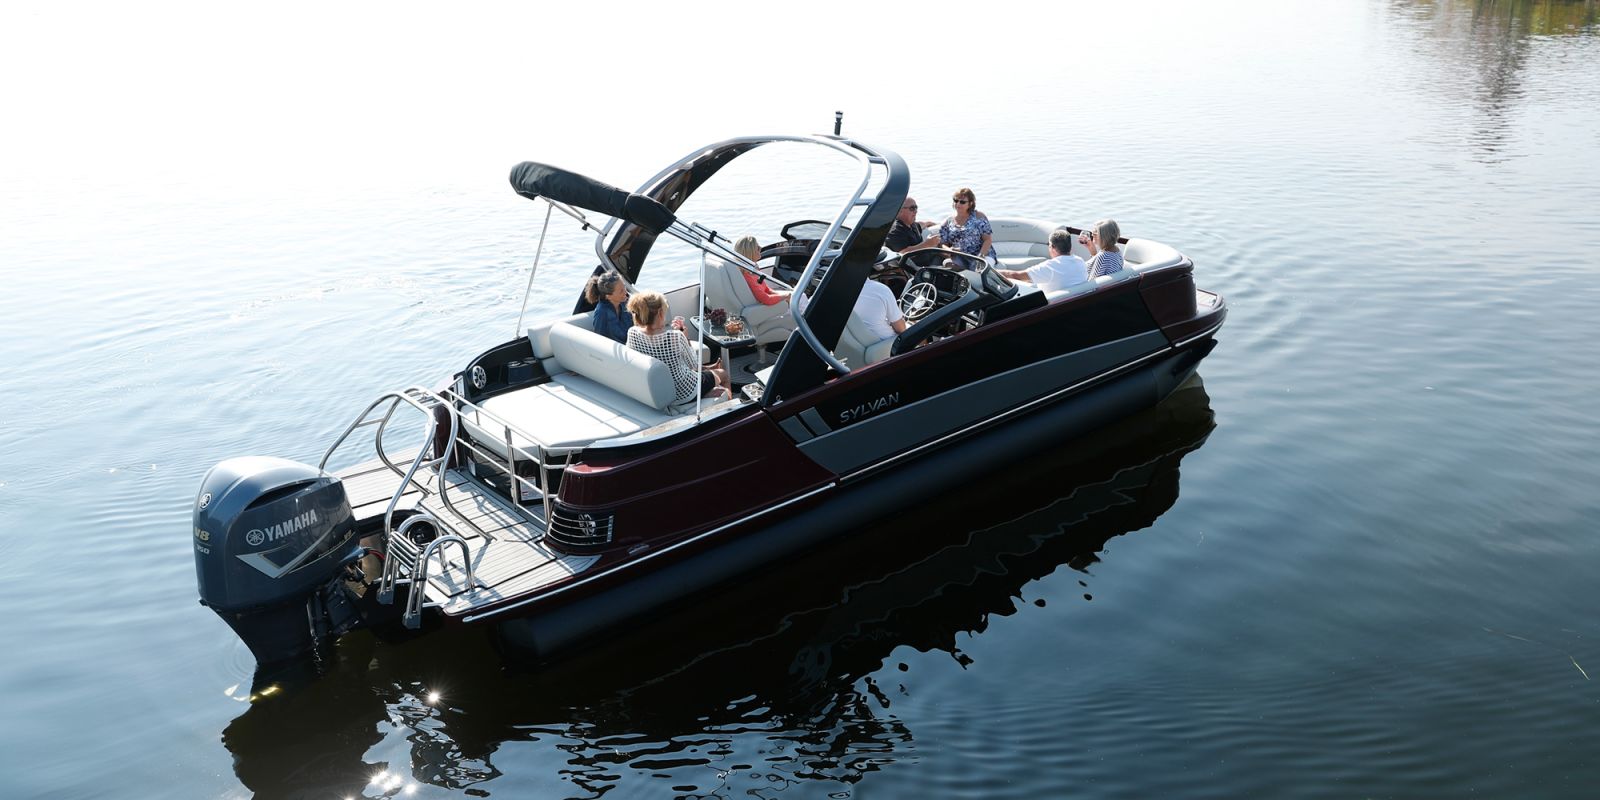 The Best Brands, The Best Boats - Smoker Craft Family of Boats